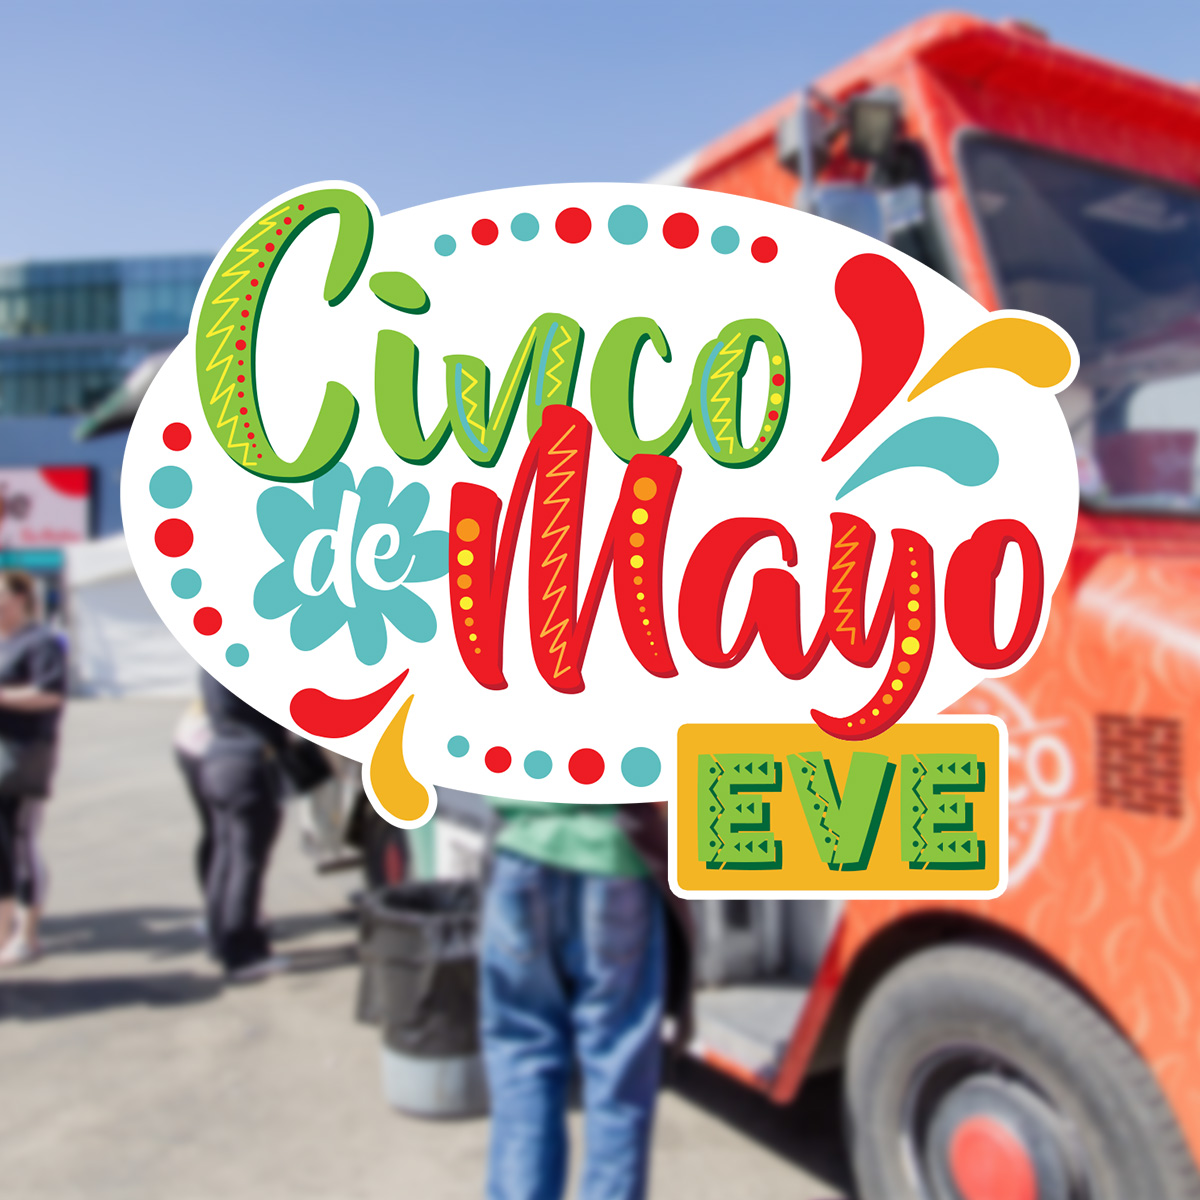 🚨 HEADS UP! 🚨 Get ready for the ultimate bash for Cinco de Mayo Eve! Join us in ICE District Plaza on May 4 from 4:30-7:30 PM for free family fun! Live music, DJ beats, salsa lessons, and mouthwatering eats from Calle Mexico & El Mero Mero Taqueria! Don't miss out!